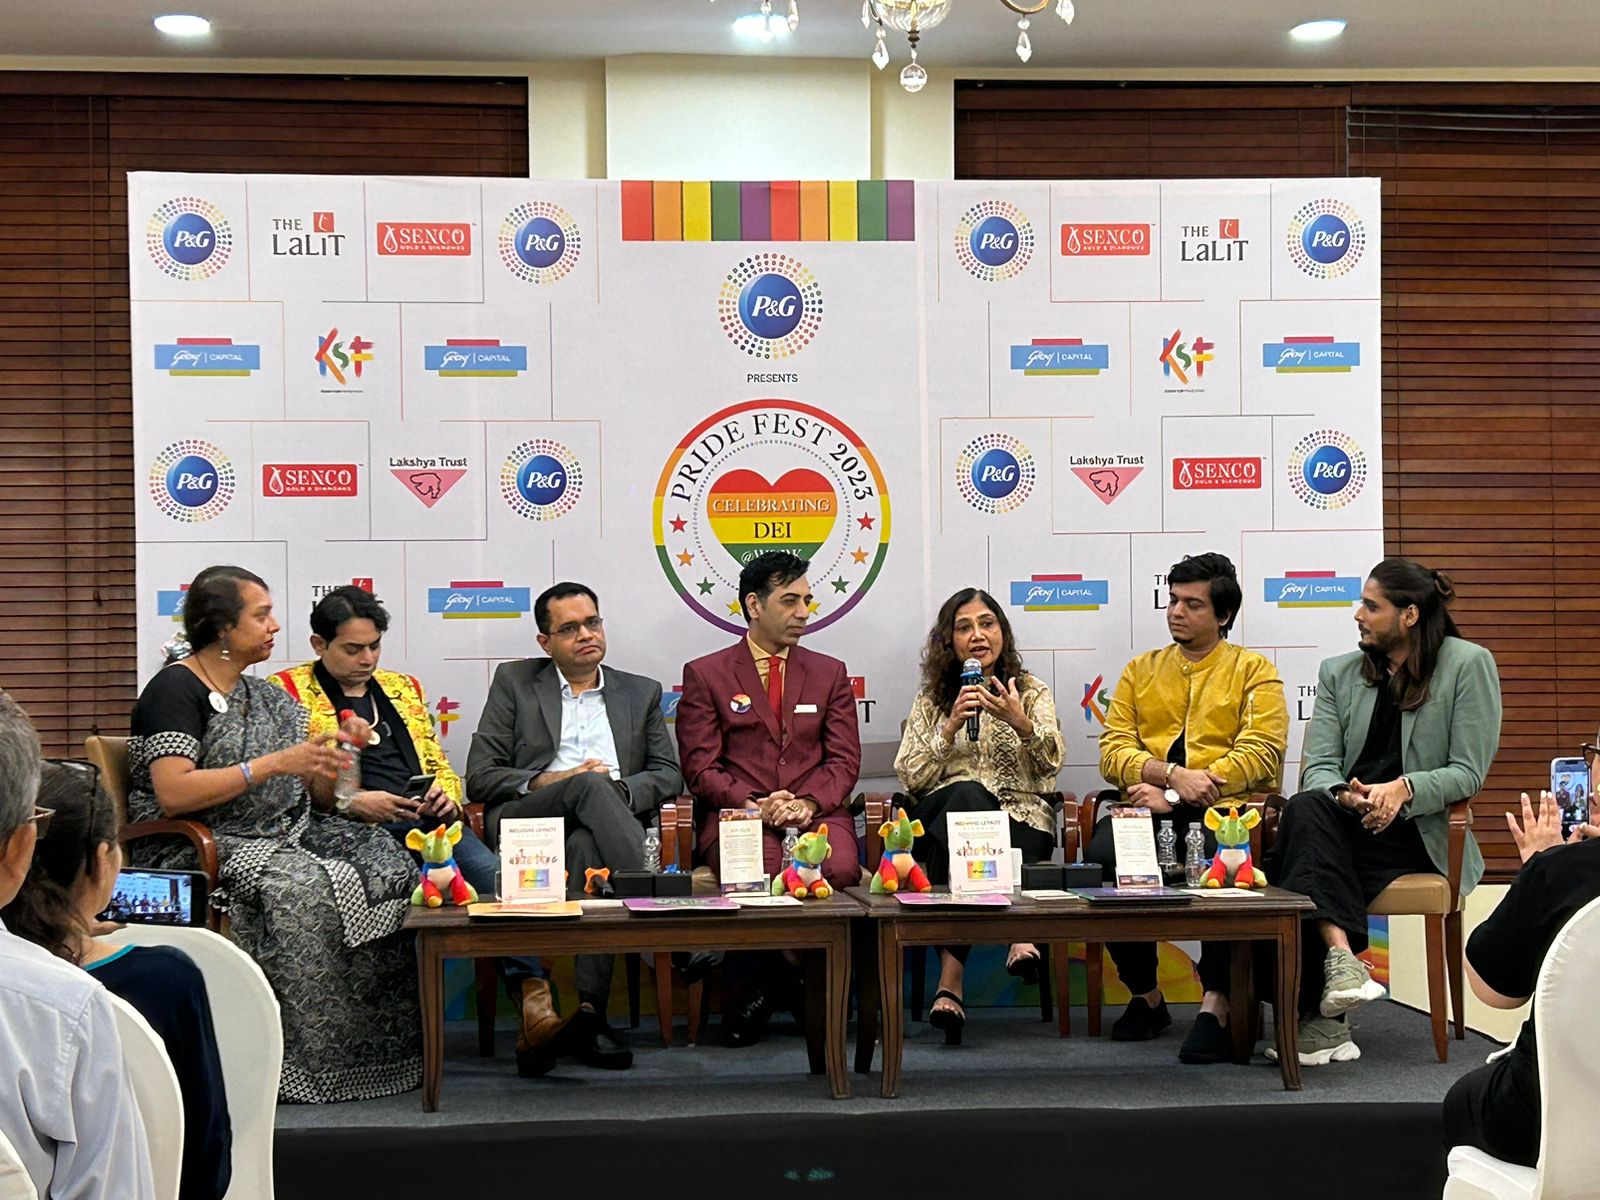 P&G India, Godrej Capital, Senco Gold & Diamond, and The Lalit Suri Group Join Forces to Present Pride Fest 2023